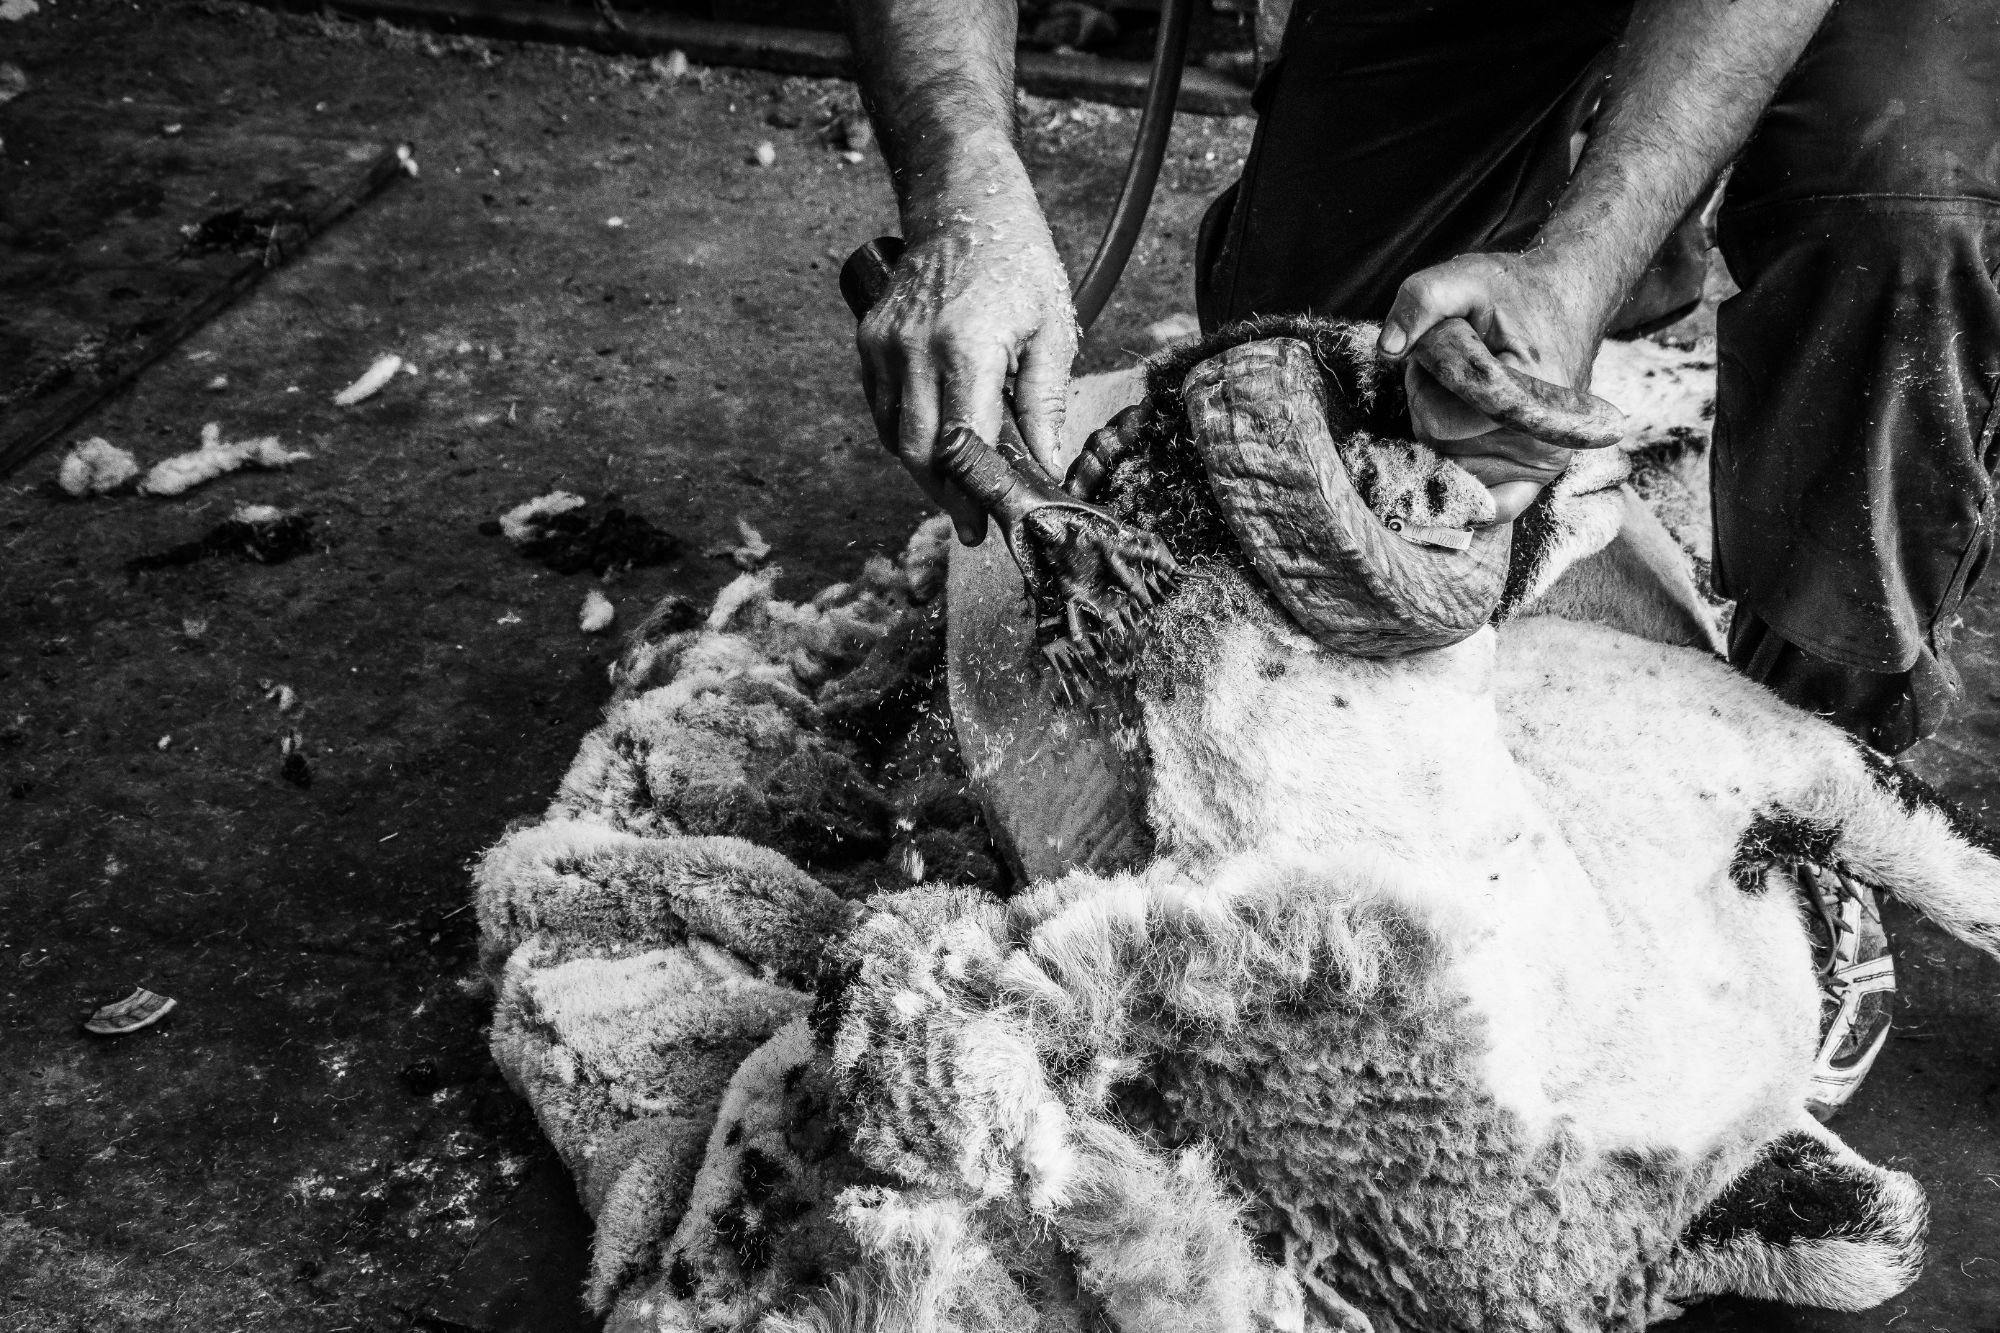 Sheep Sheering - Goathland, North York Moors. The farmer clips the wool from the sheep's neck with one hand while holding it's head in place by the horn with the other hand.